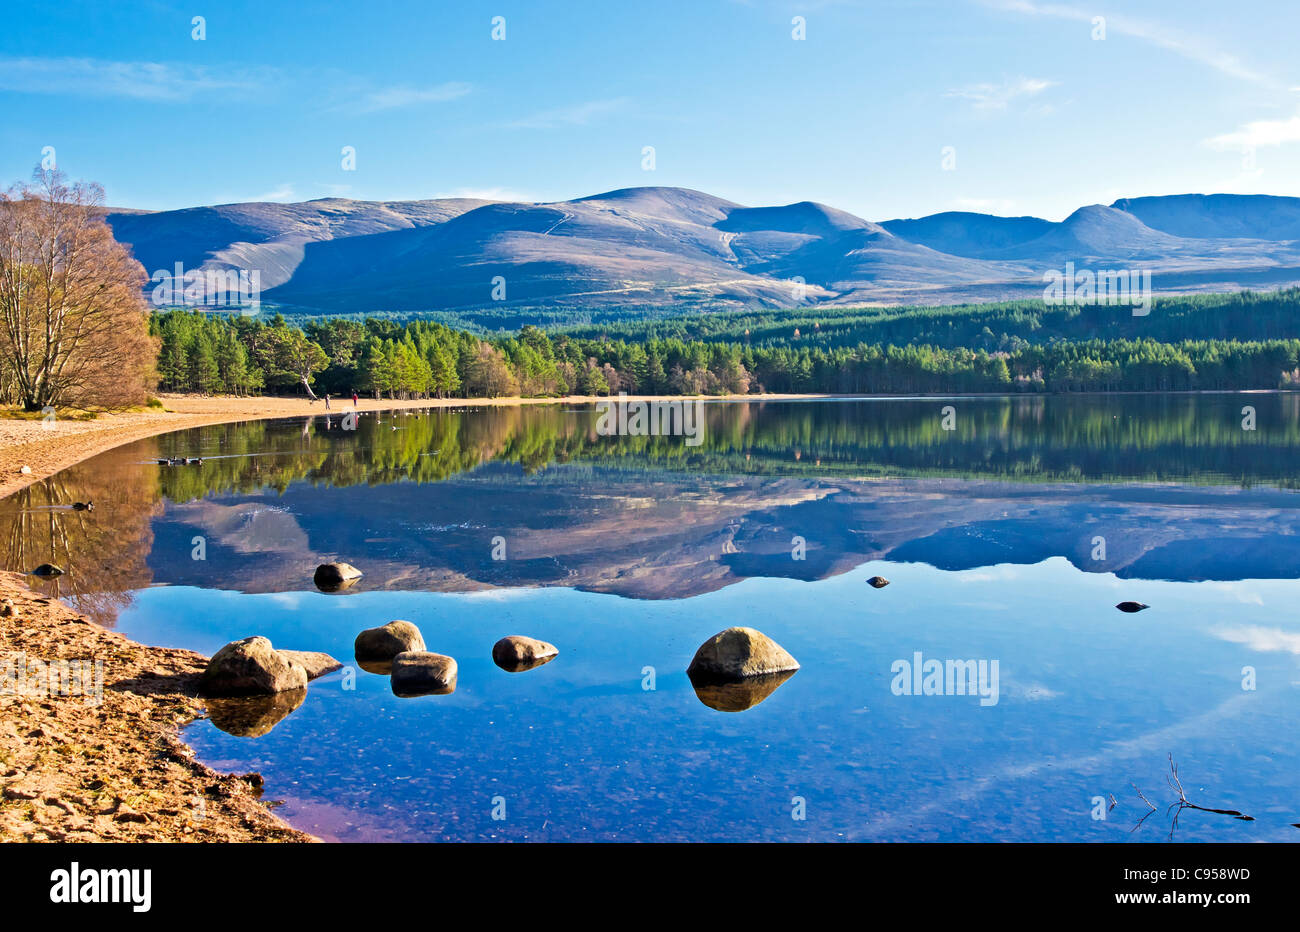 Loch Morlich in the Cairngorms region of Scotland on a calm and sunny ...